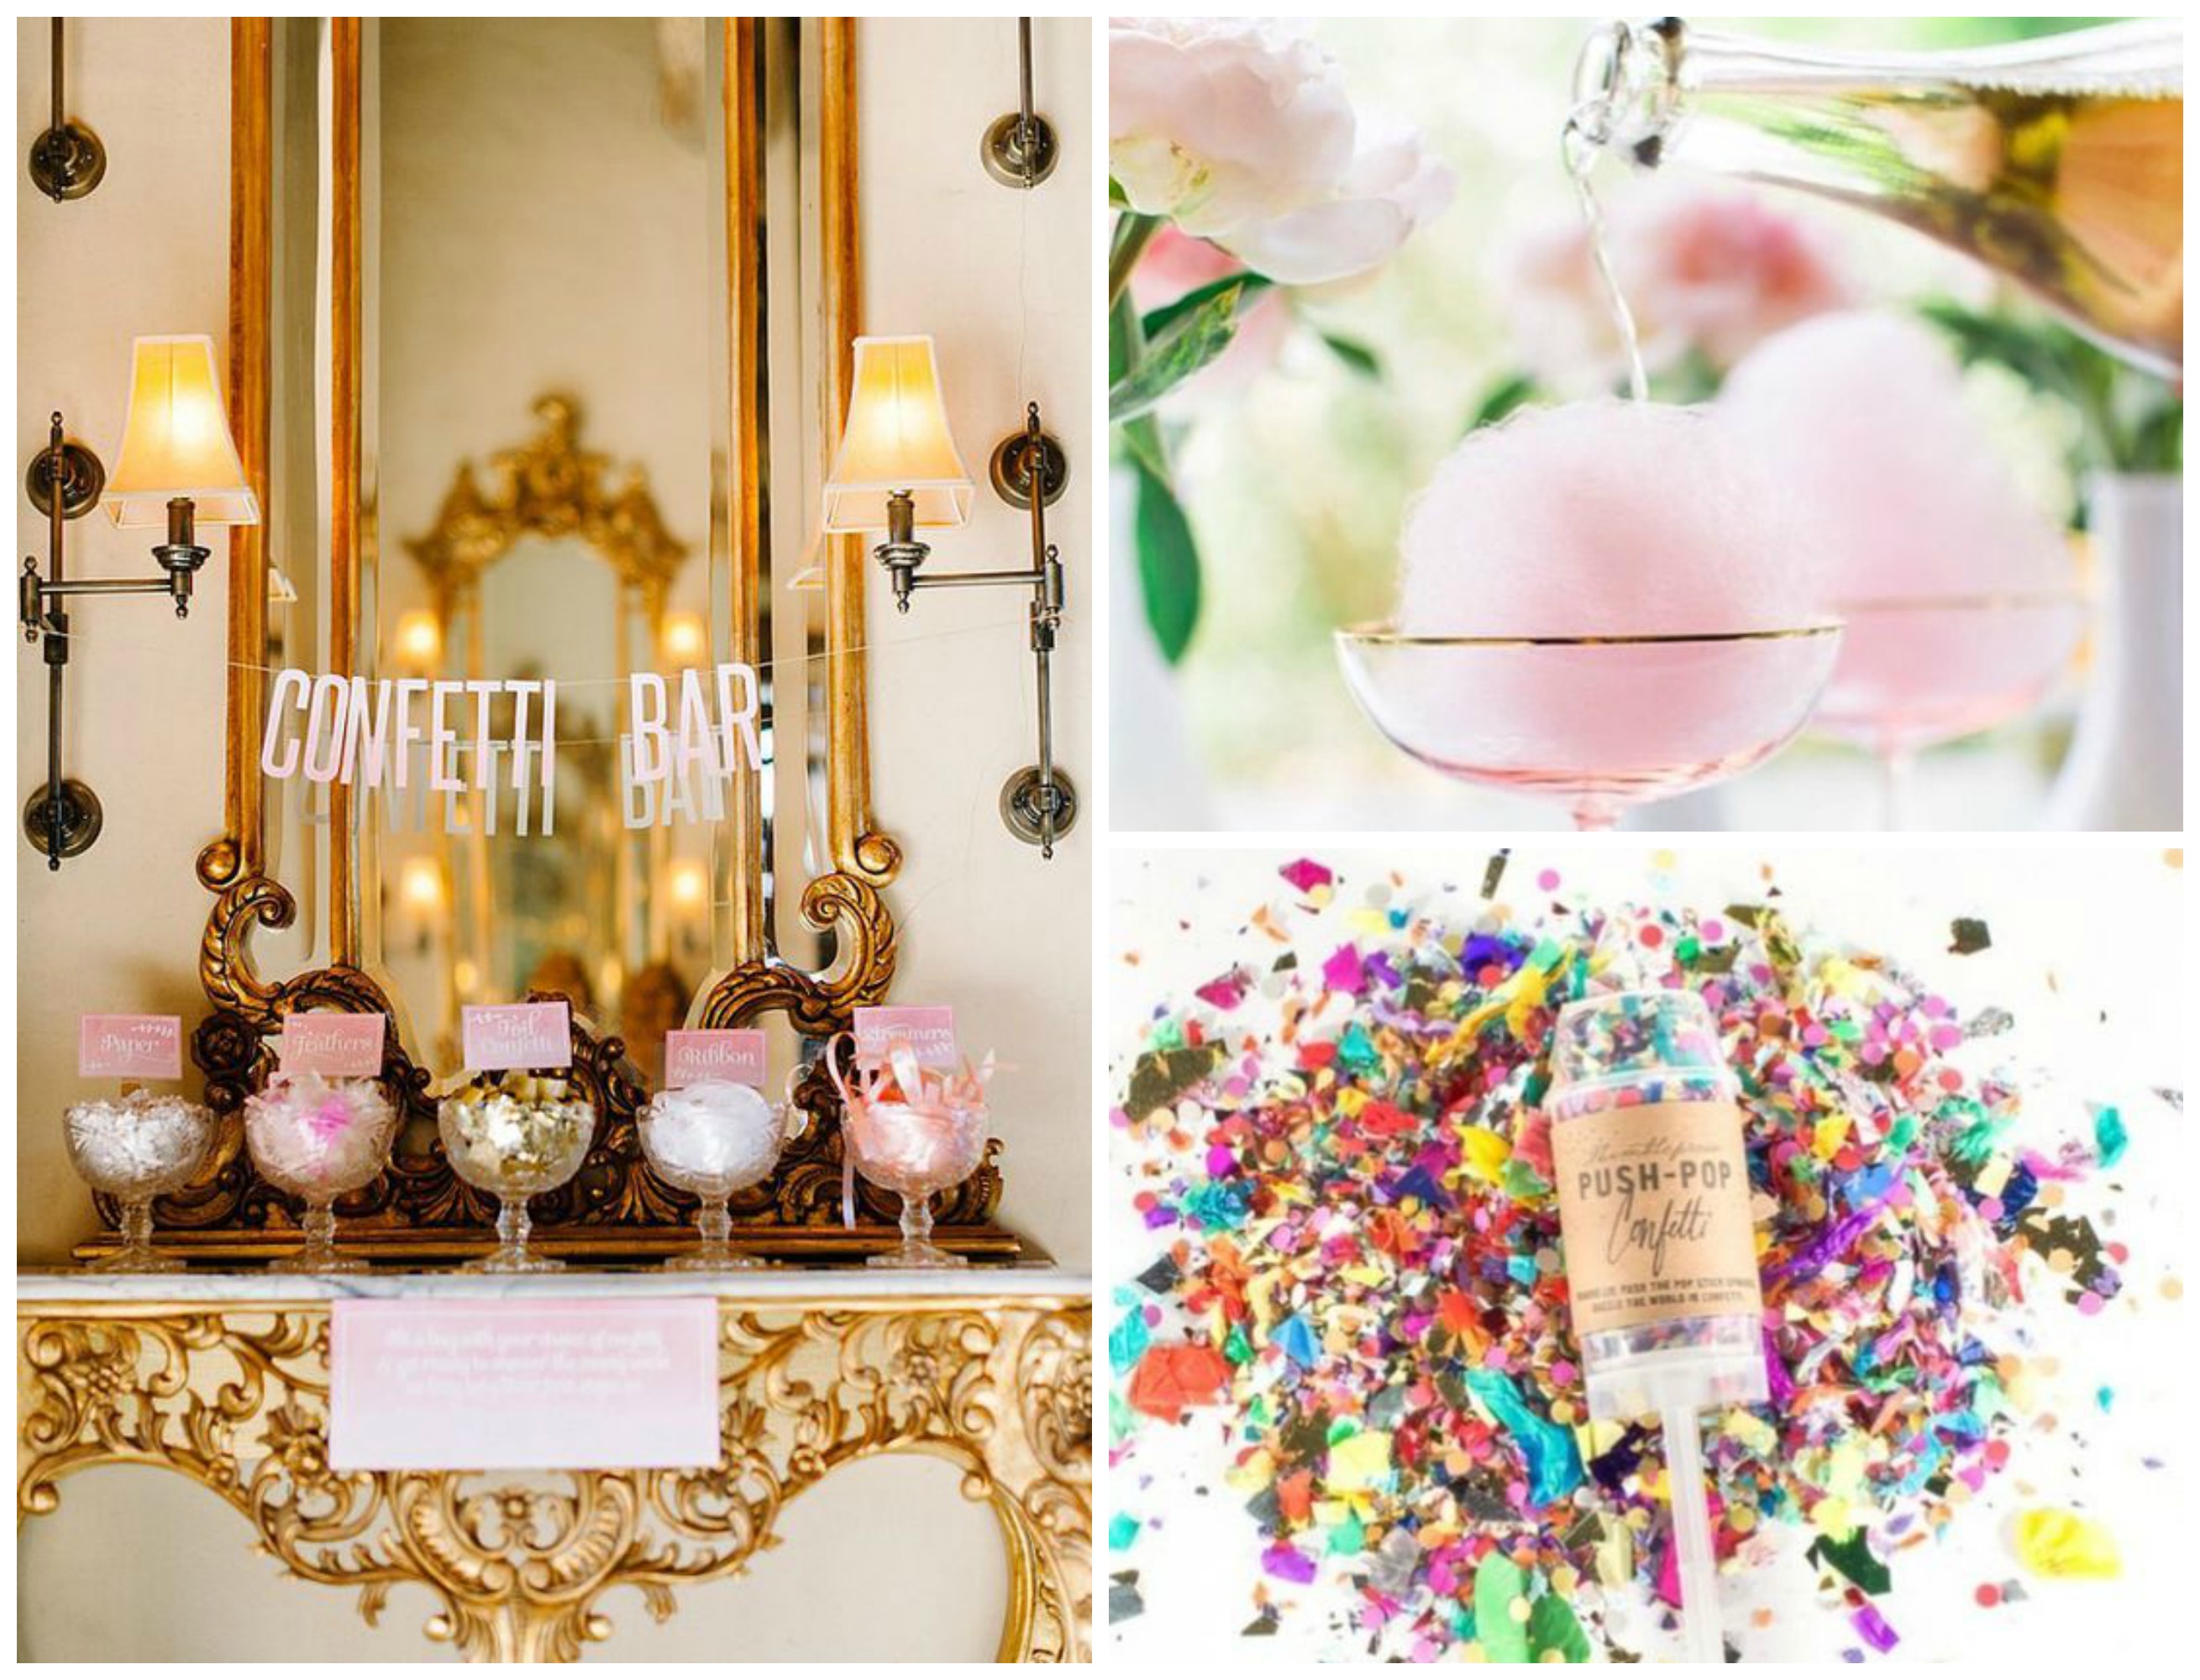 2016 Wedding Trends - Pop Up Stations